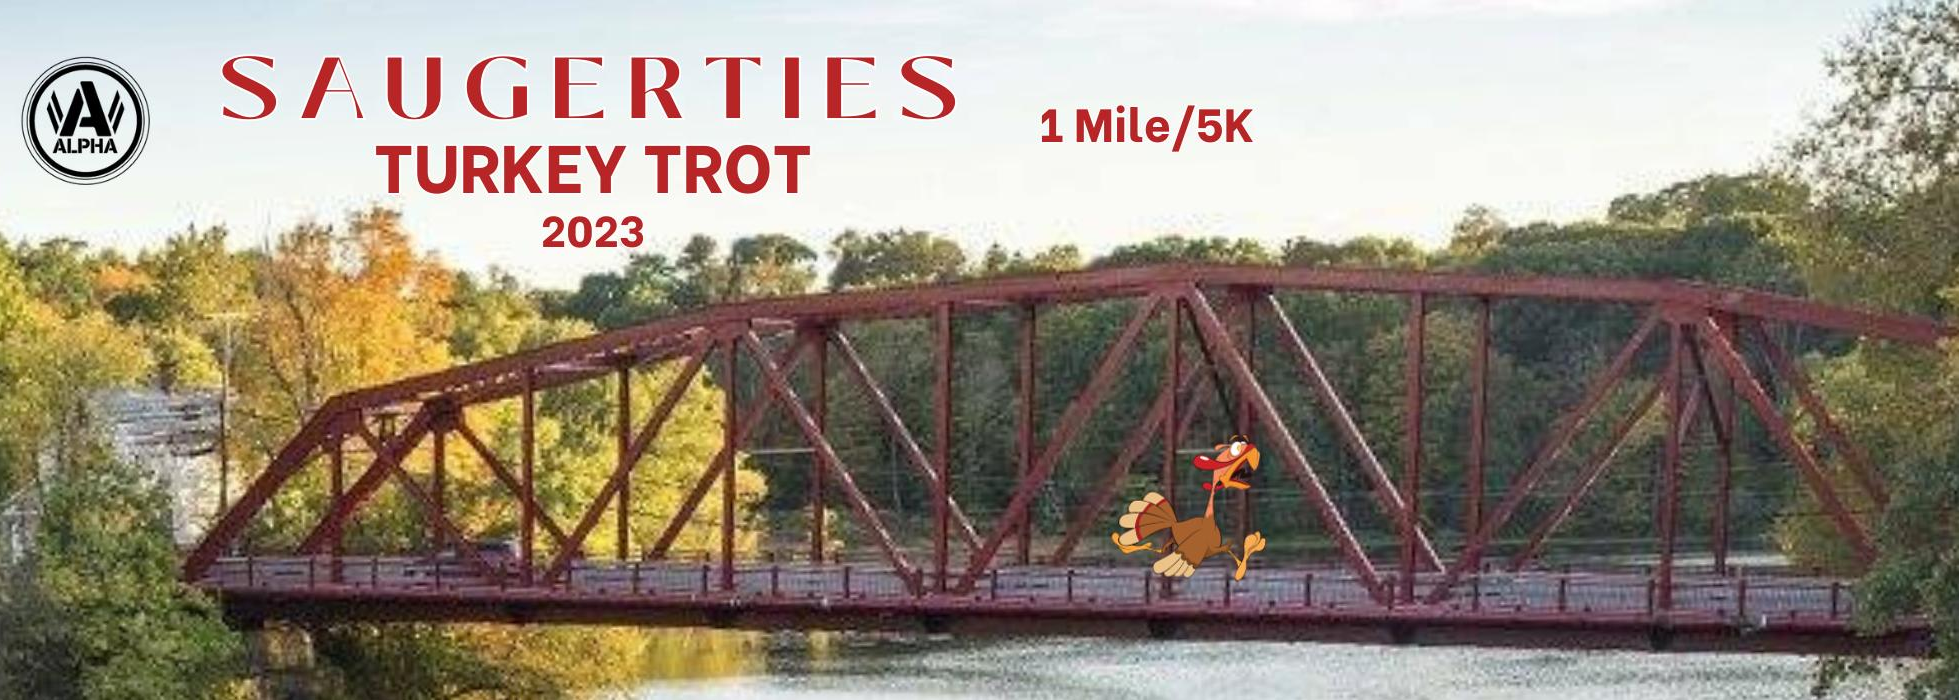 Saugerties Turkey Trot Ulster County NY Tourism